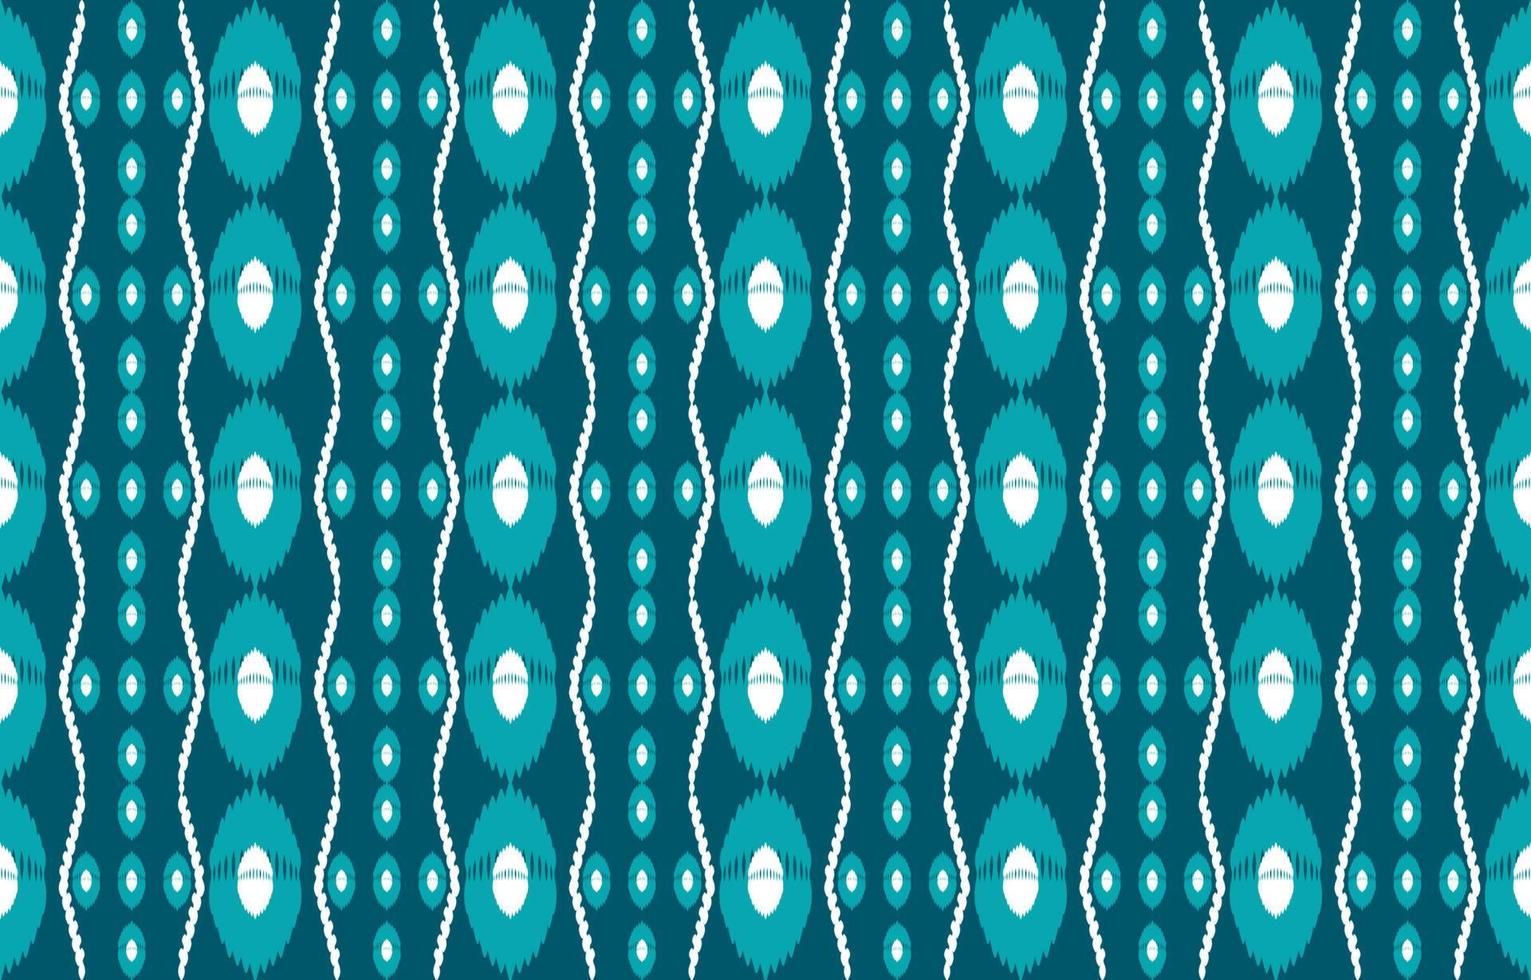 Abstract ikat vintage geometric seamless pattern. Ethnic boho fabric retro vintage style on green turquoise background. Vector design for texture, textile, clothing, wallpaper, carpet, art print.